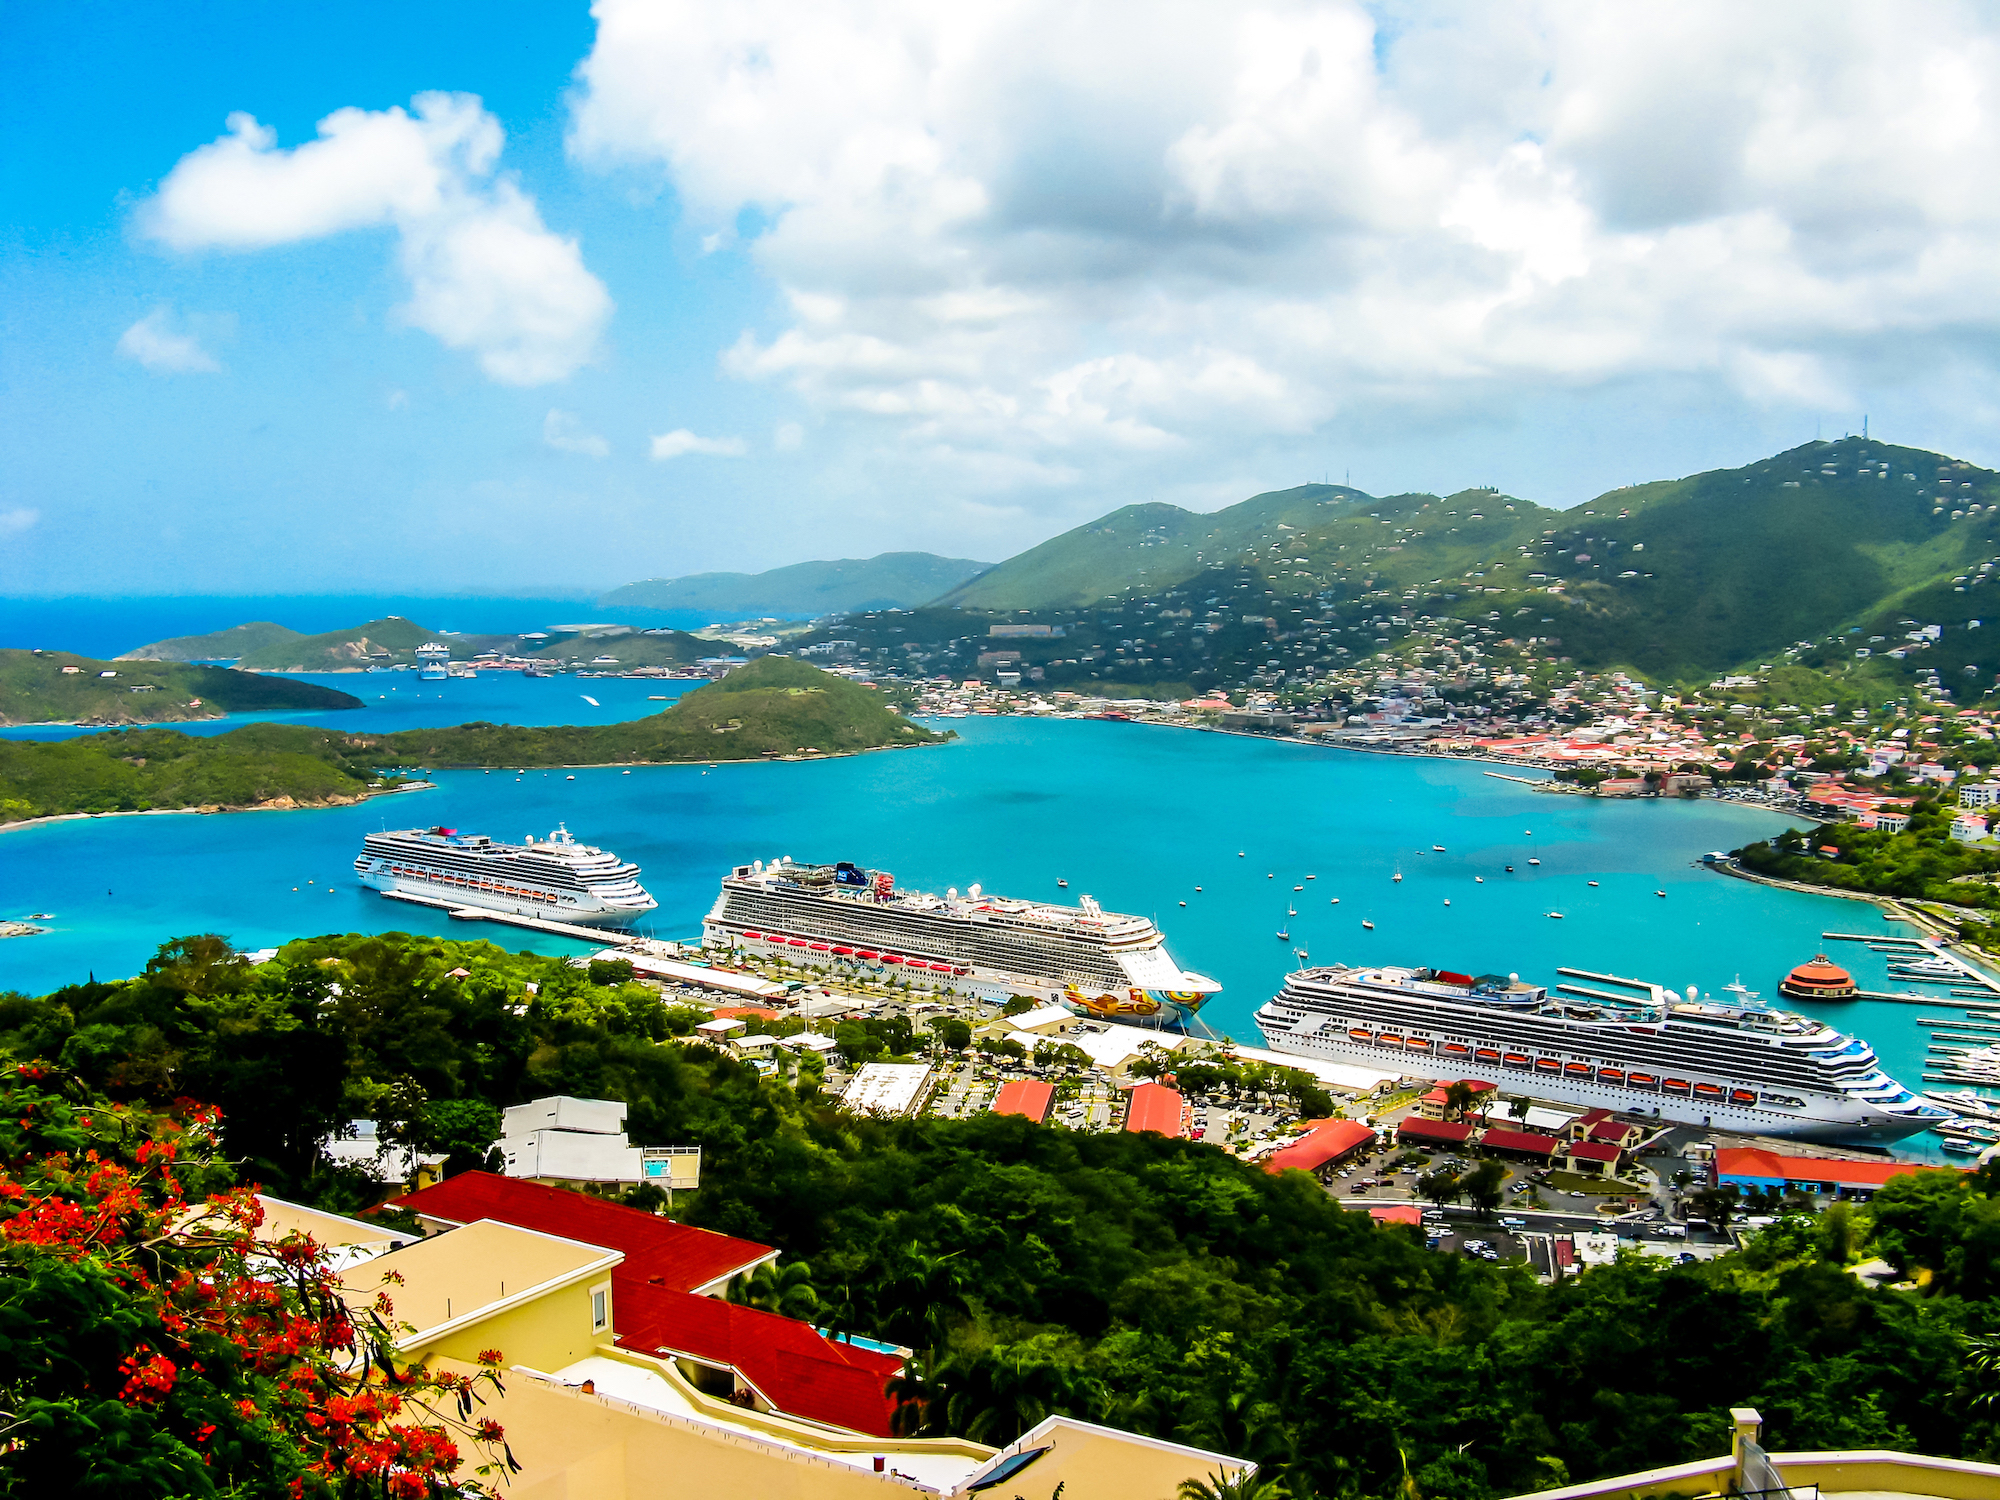 6 Misleading Destination and Cruise “Facts” That Can Affect Your Caribbean Vacation